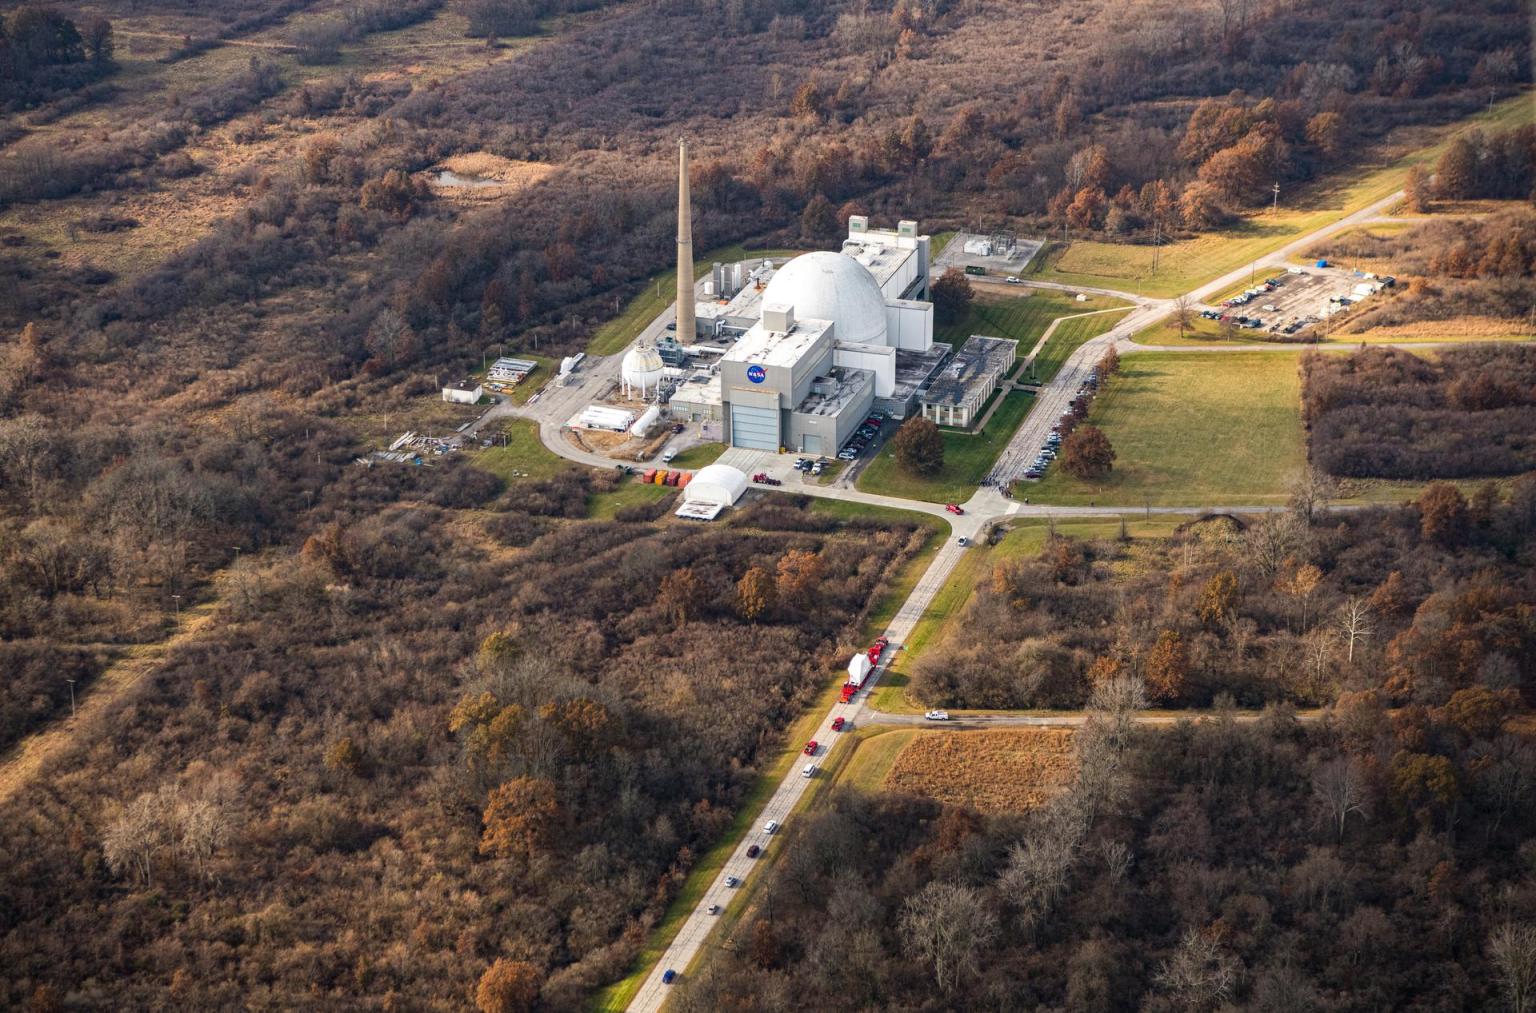 An aerial view of the Space Environments Complex at NASA's Neil Armstrong Test Facility in Sandusky, Ohio.